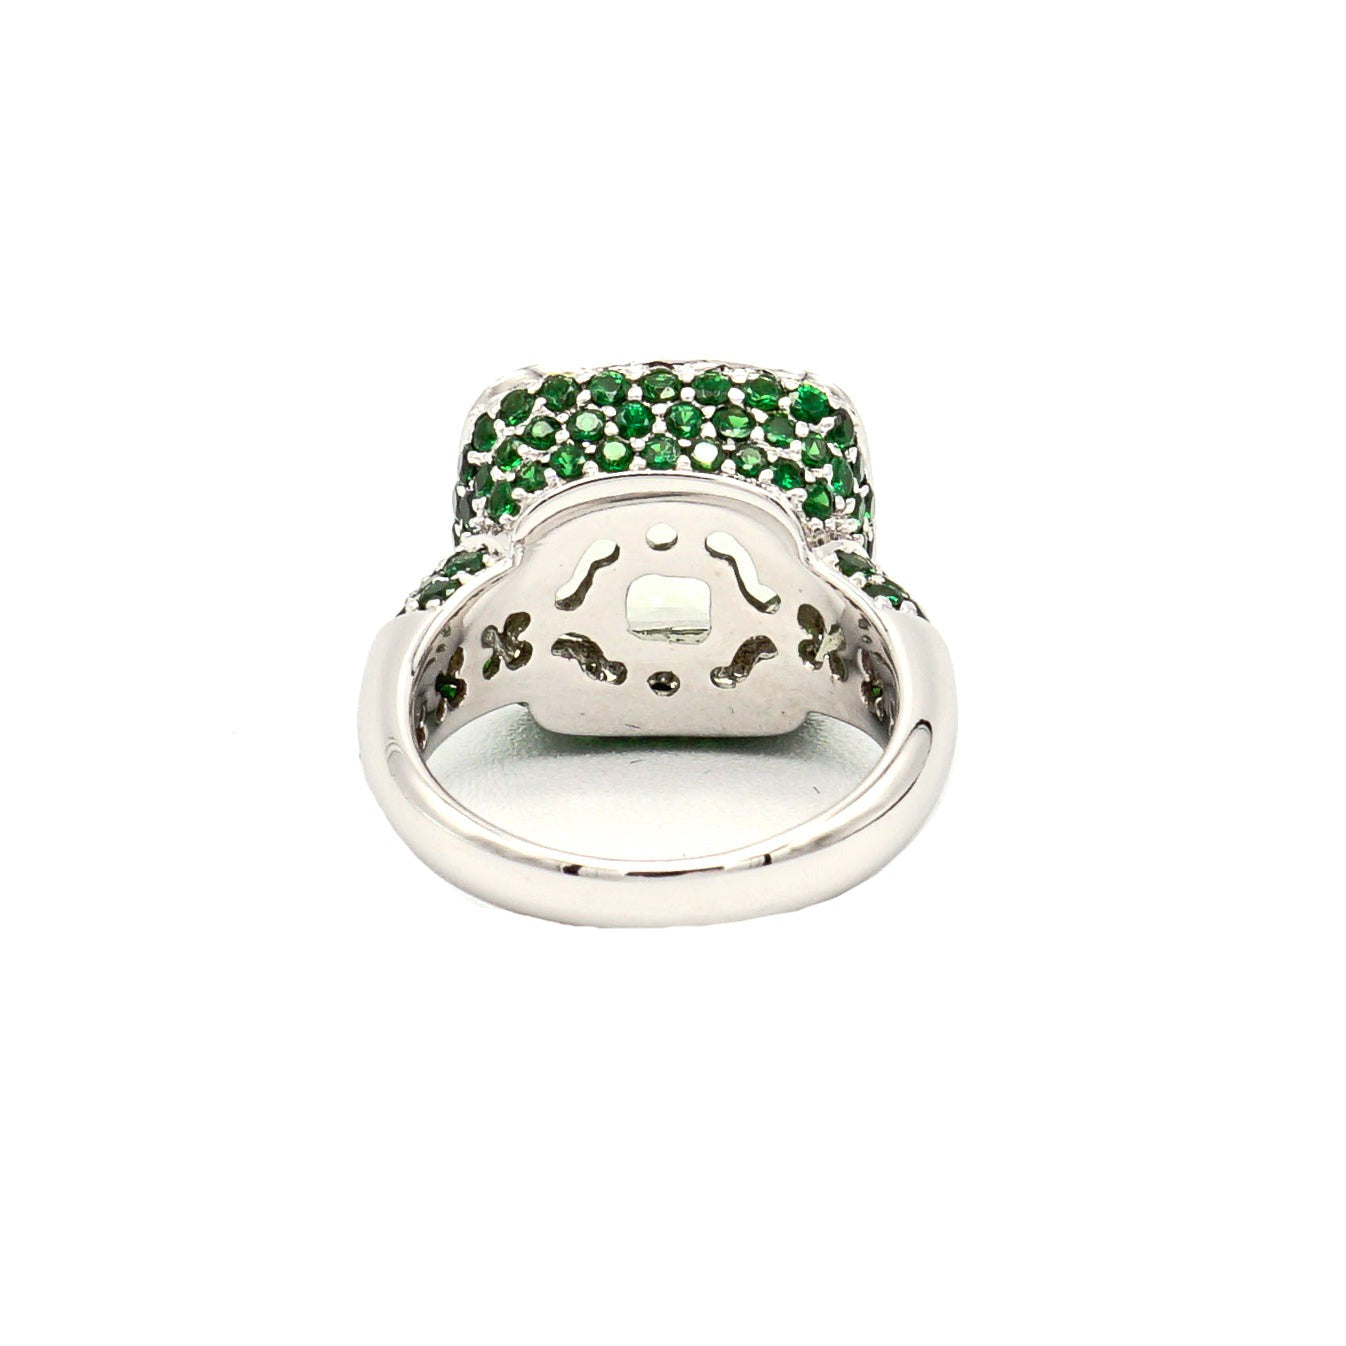 18k White Gold Prasiolite (Green Amethyst) With Diamonds and Tsavorite - Le Vive Jewelry in Riverside